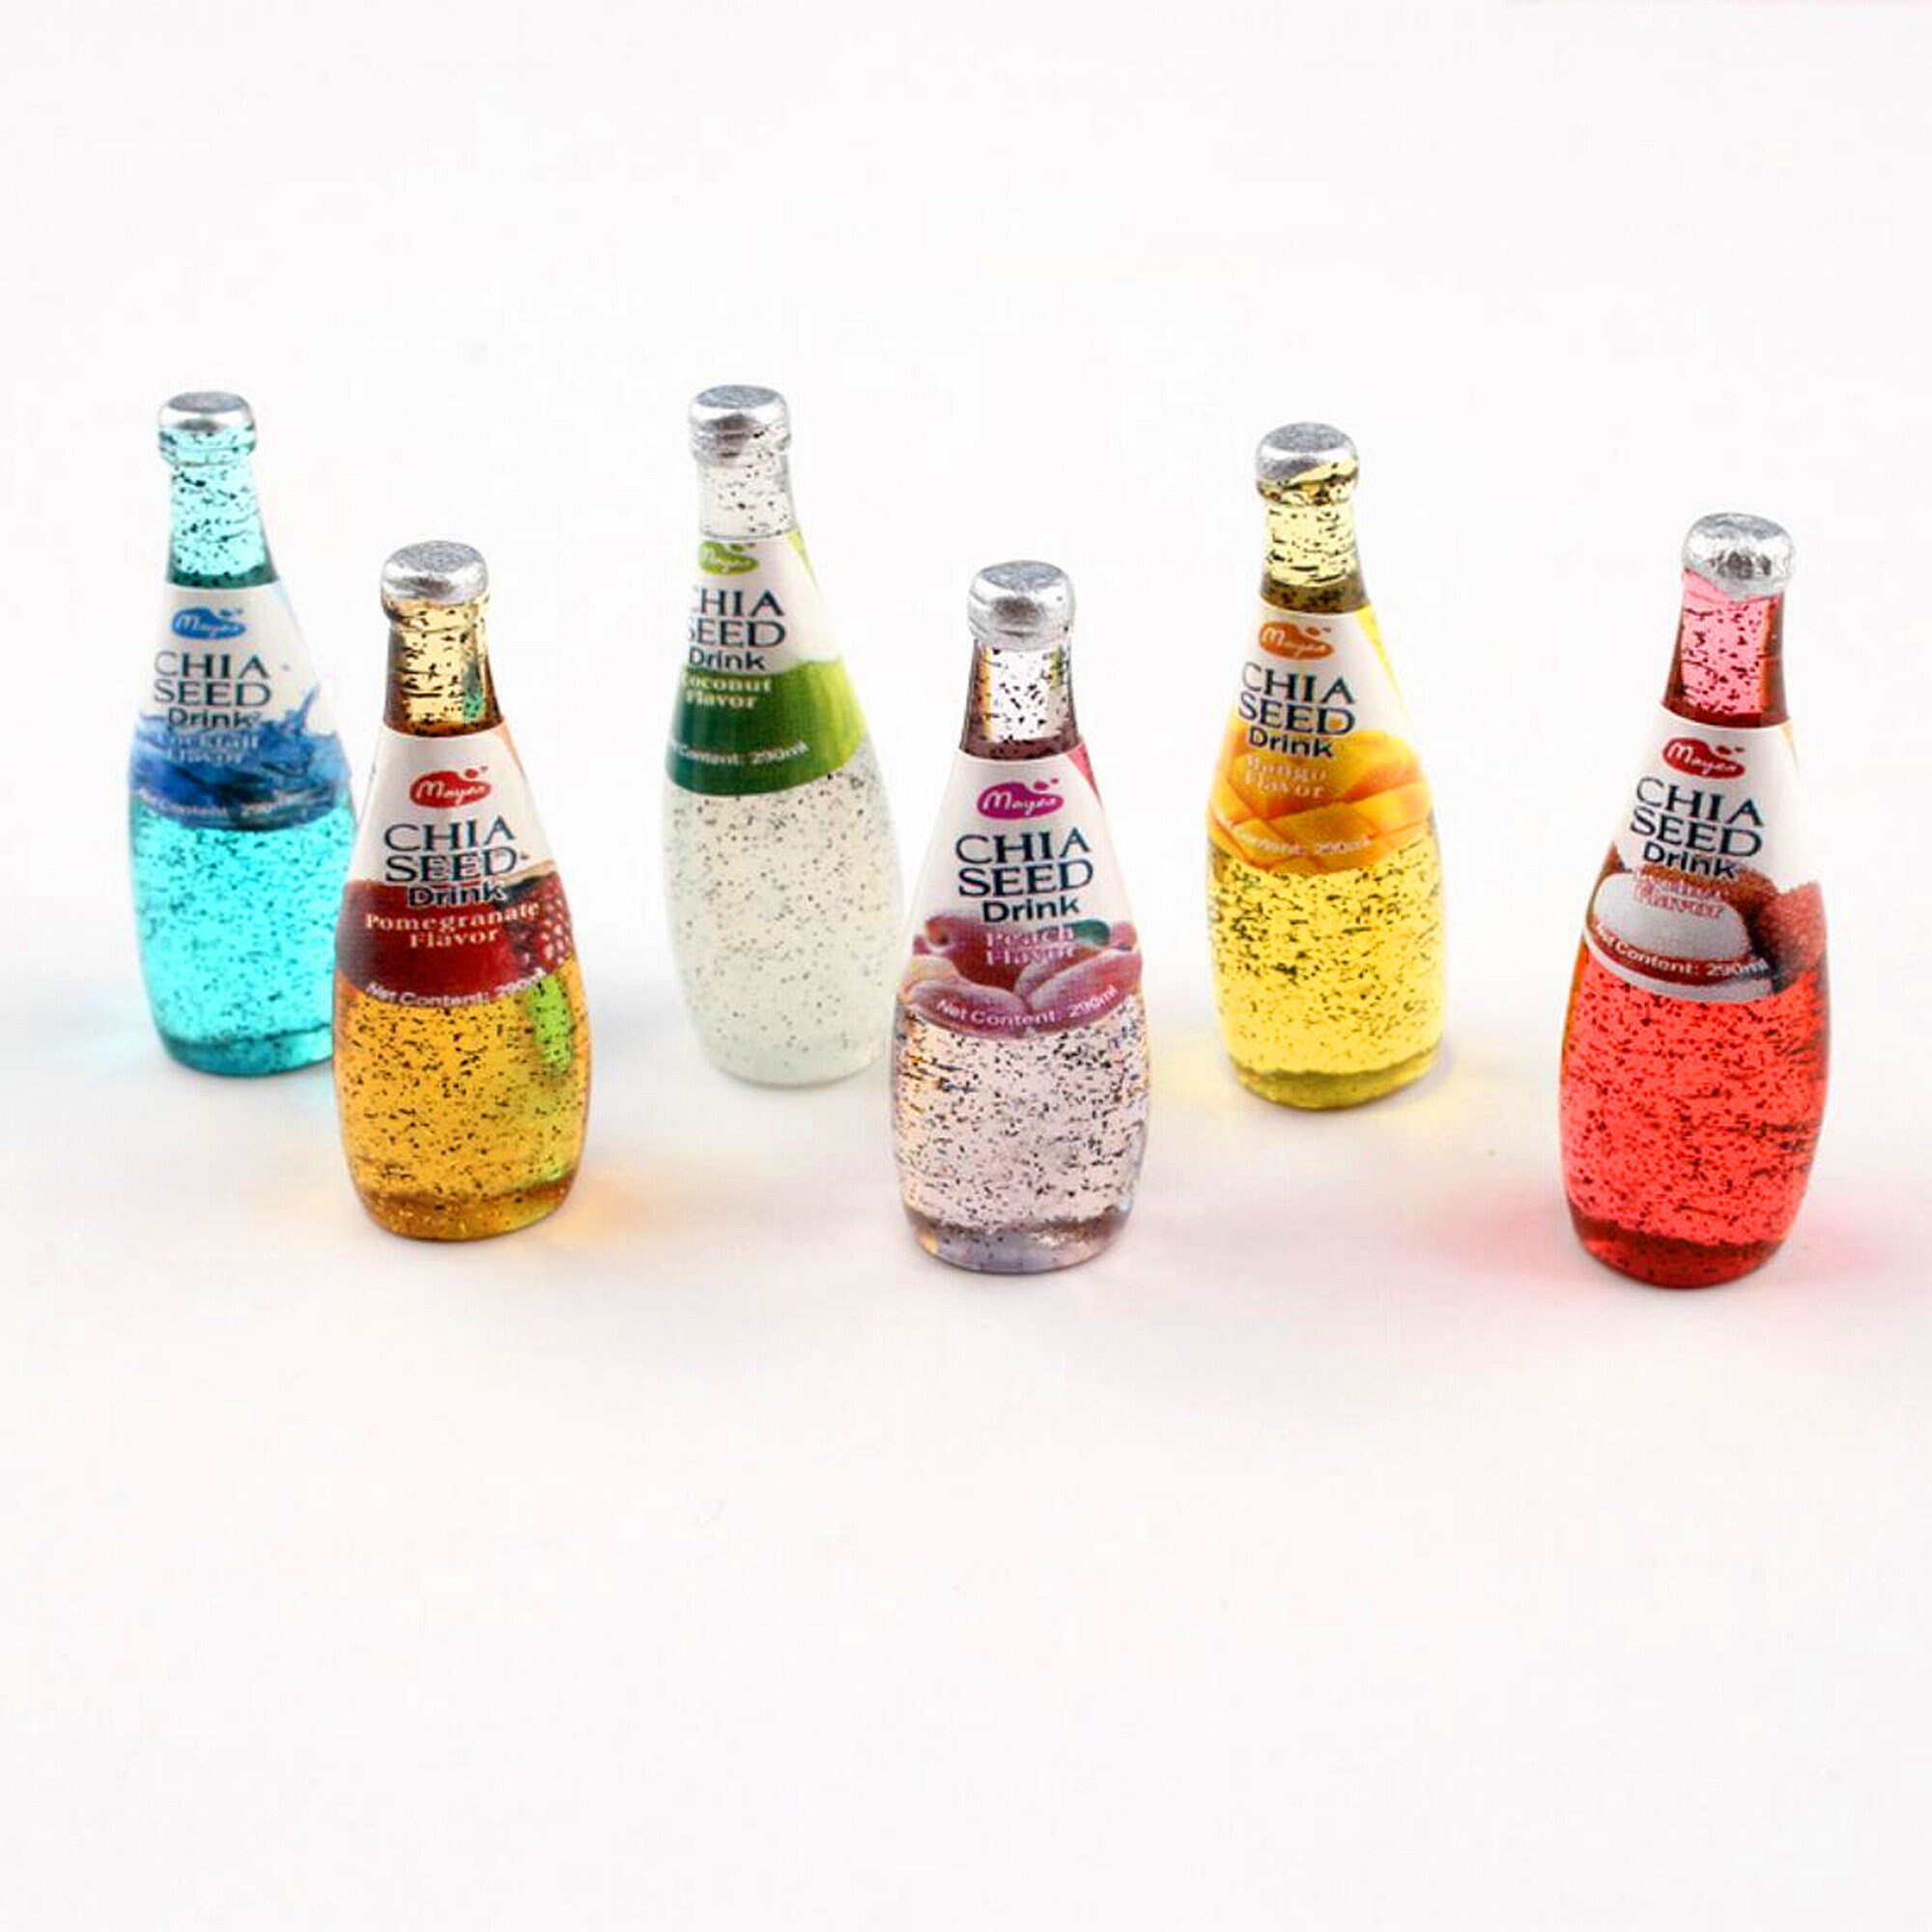 DOLLS HOUSE MINIATURE SOFT DRINK WITH CHIA SEEDS DD 